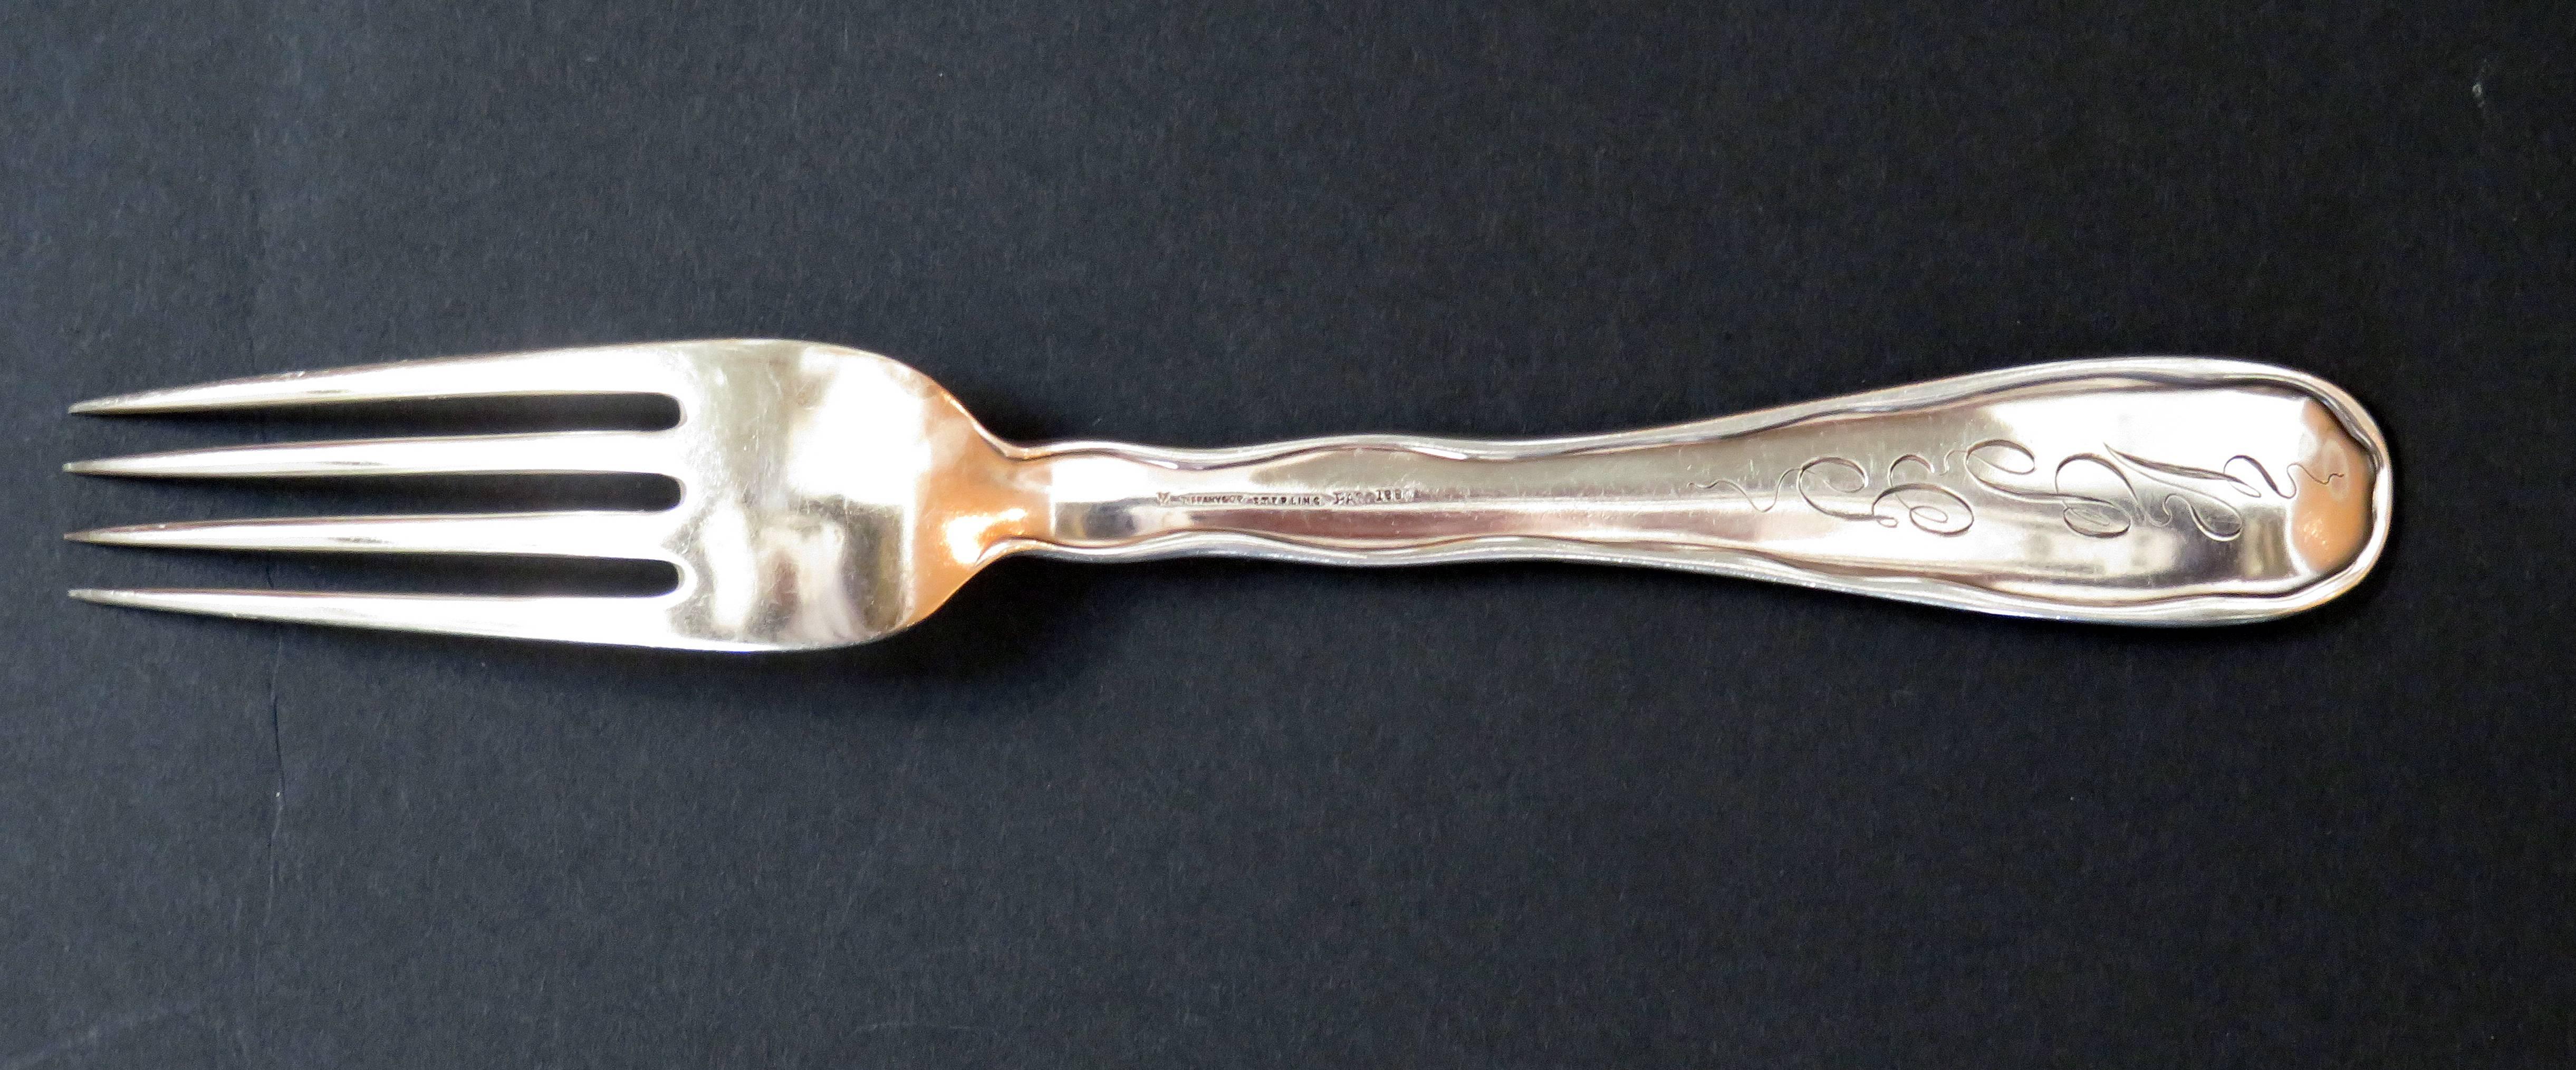 American Tiffany & Company Lap over Edge Acid Etched Dinner Forks, circa 1880 For Sale